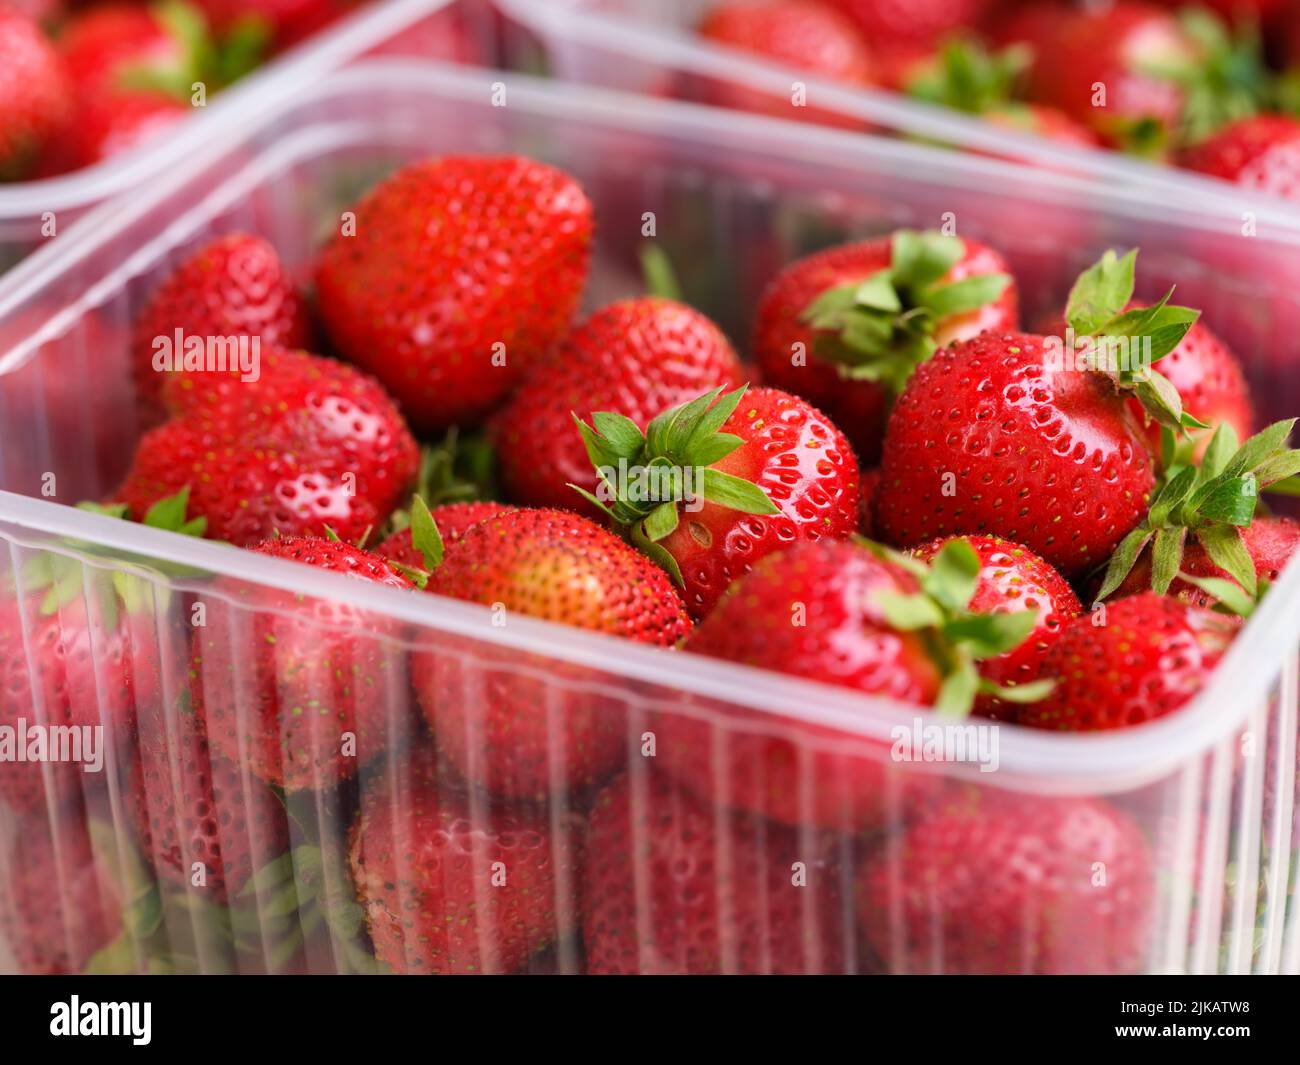 A close-up shot of a plastic container with organic red strawberries in it Stock Photo